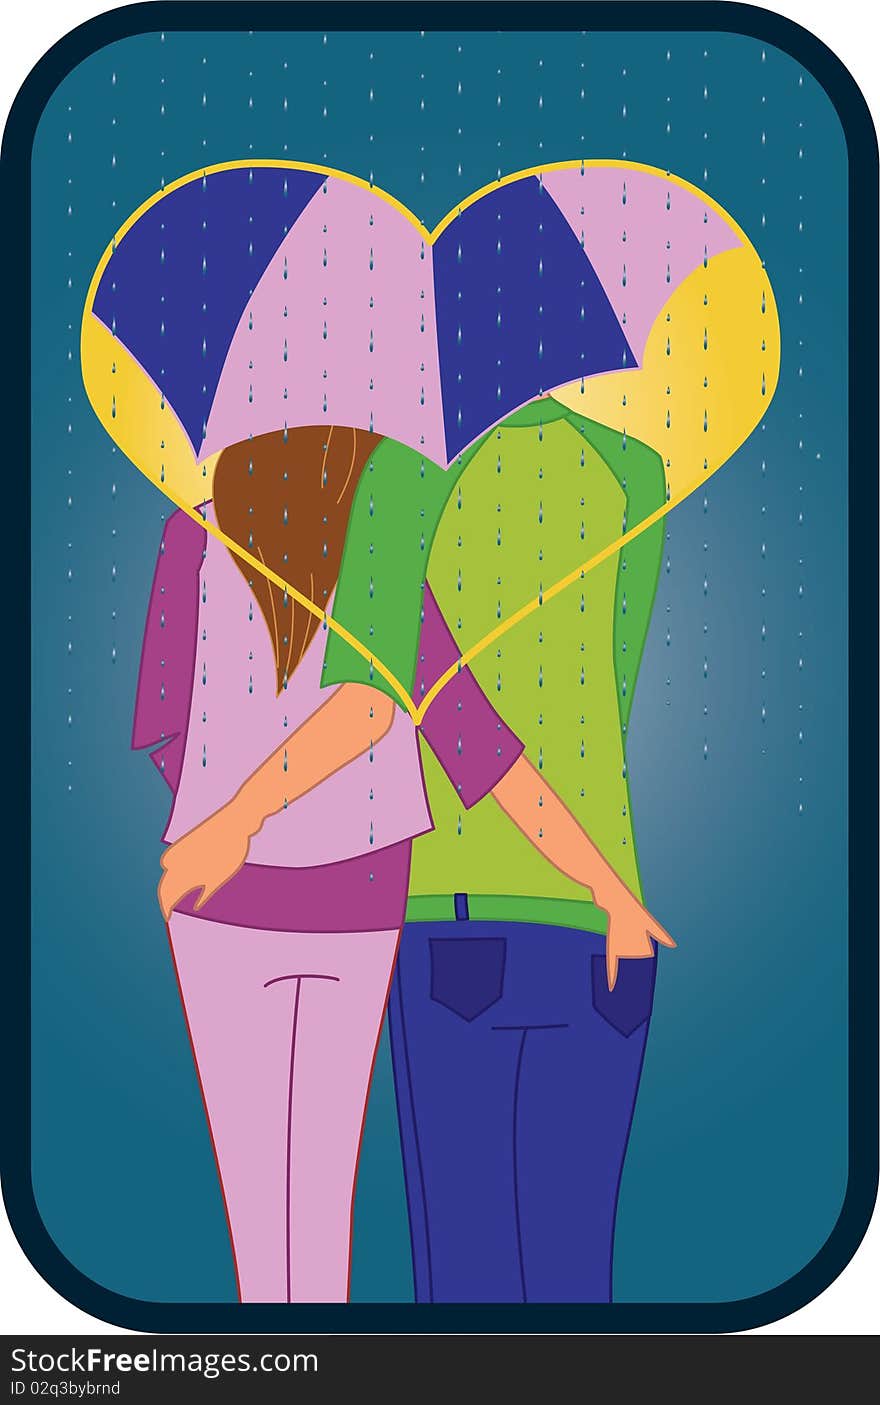 Illustration of a couple with umbrella under rain. Illustration of a couple with umbrella under rain